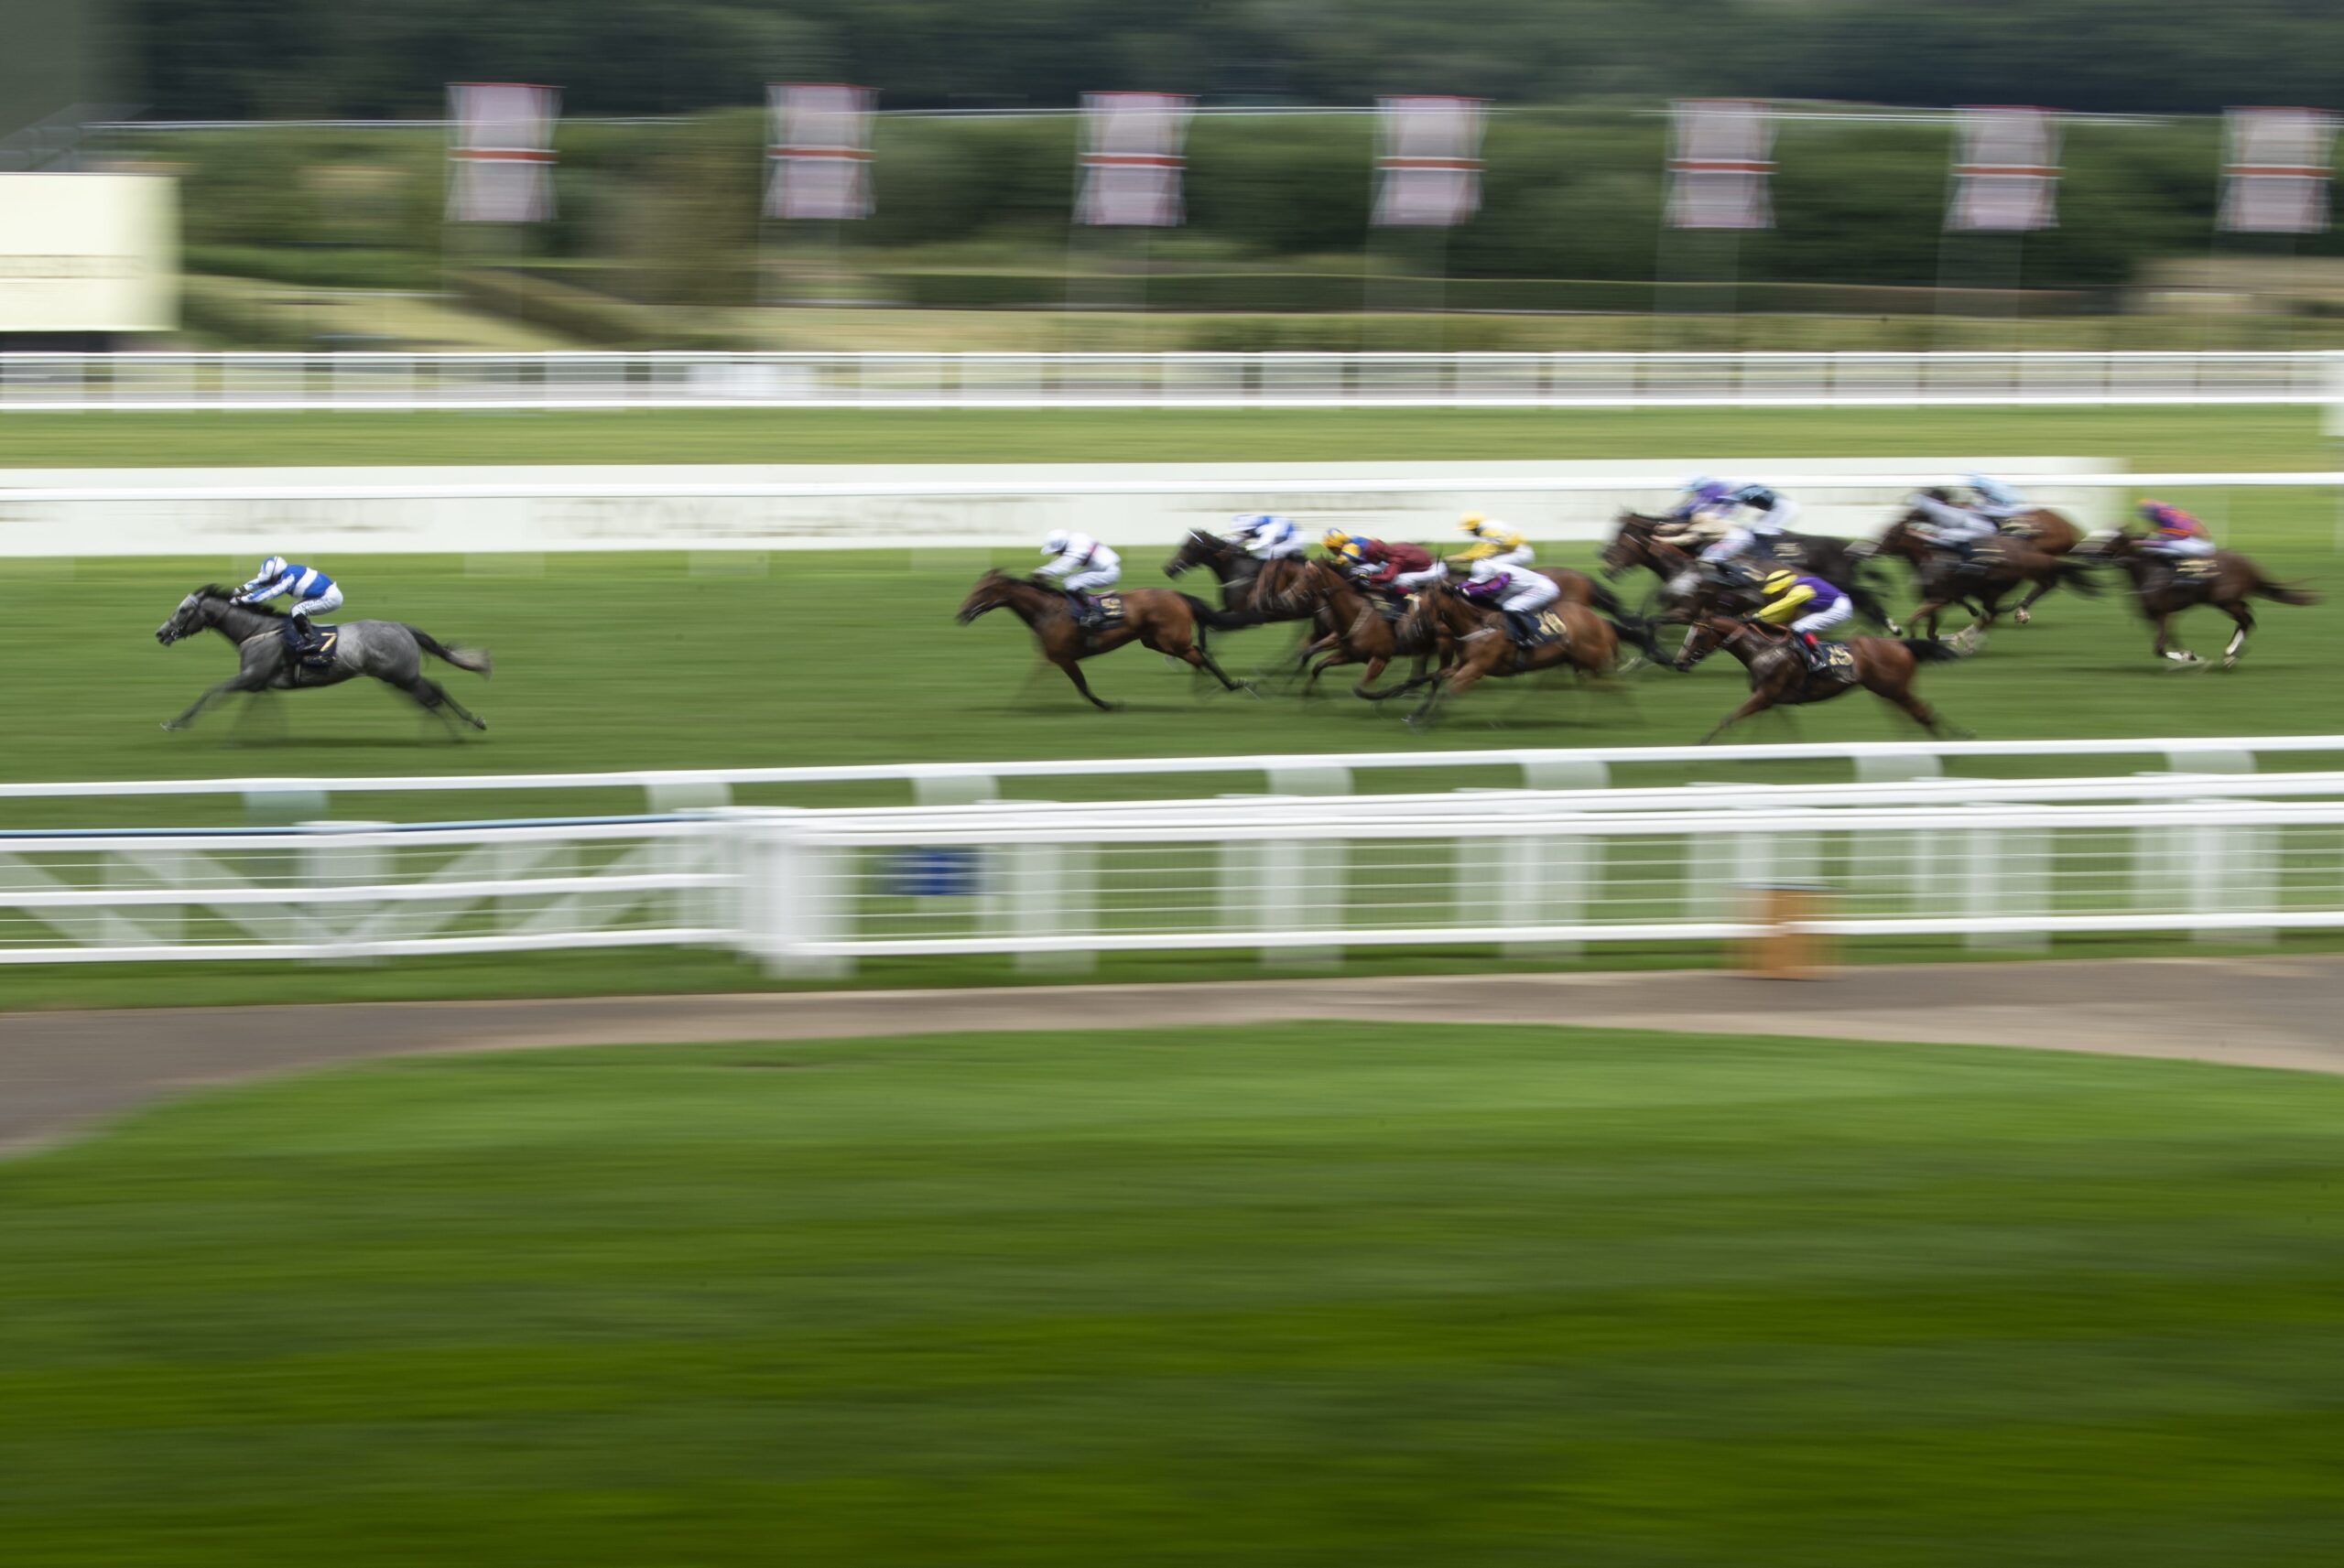 Red Letter Day at Royal Ascot as Art Power Romps Home In Opener